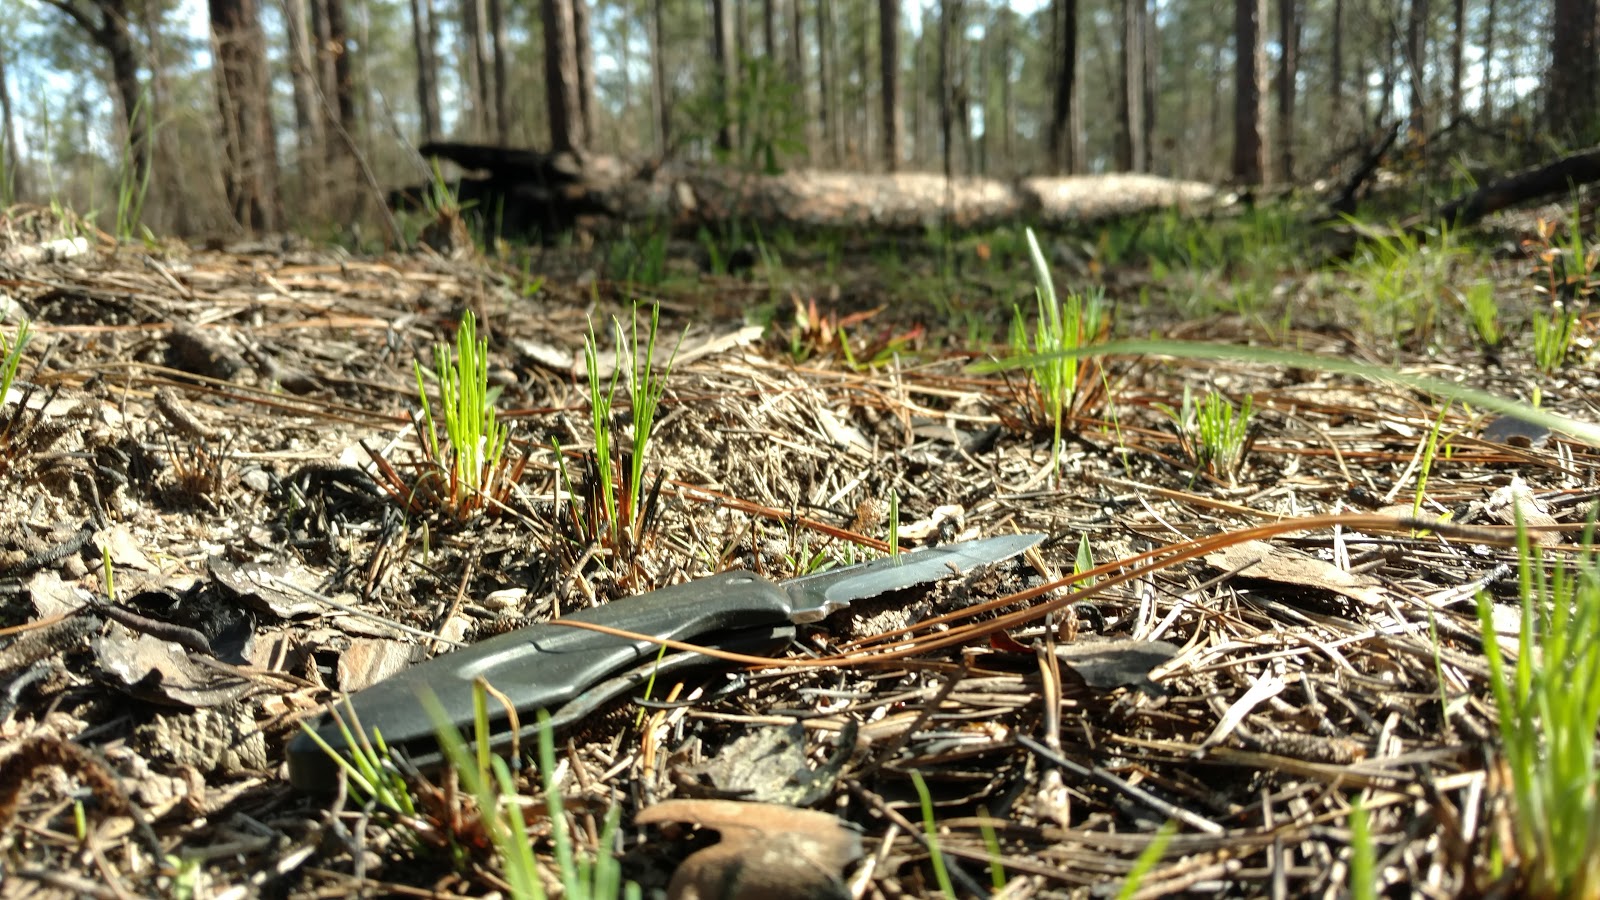 young longleaf seedlings emerging through the pine straw with a pocket knife for scale